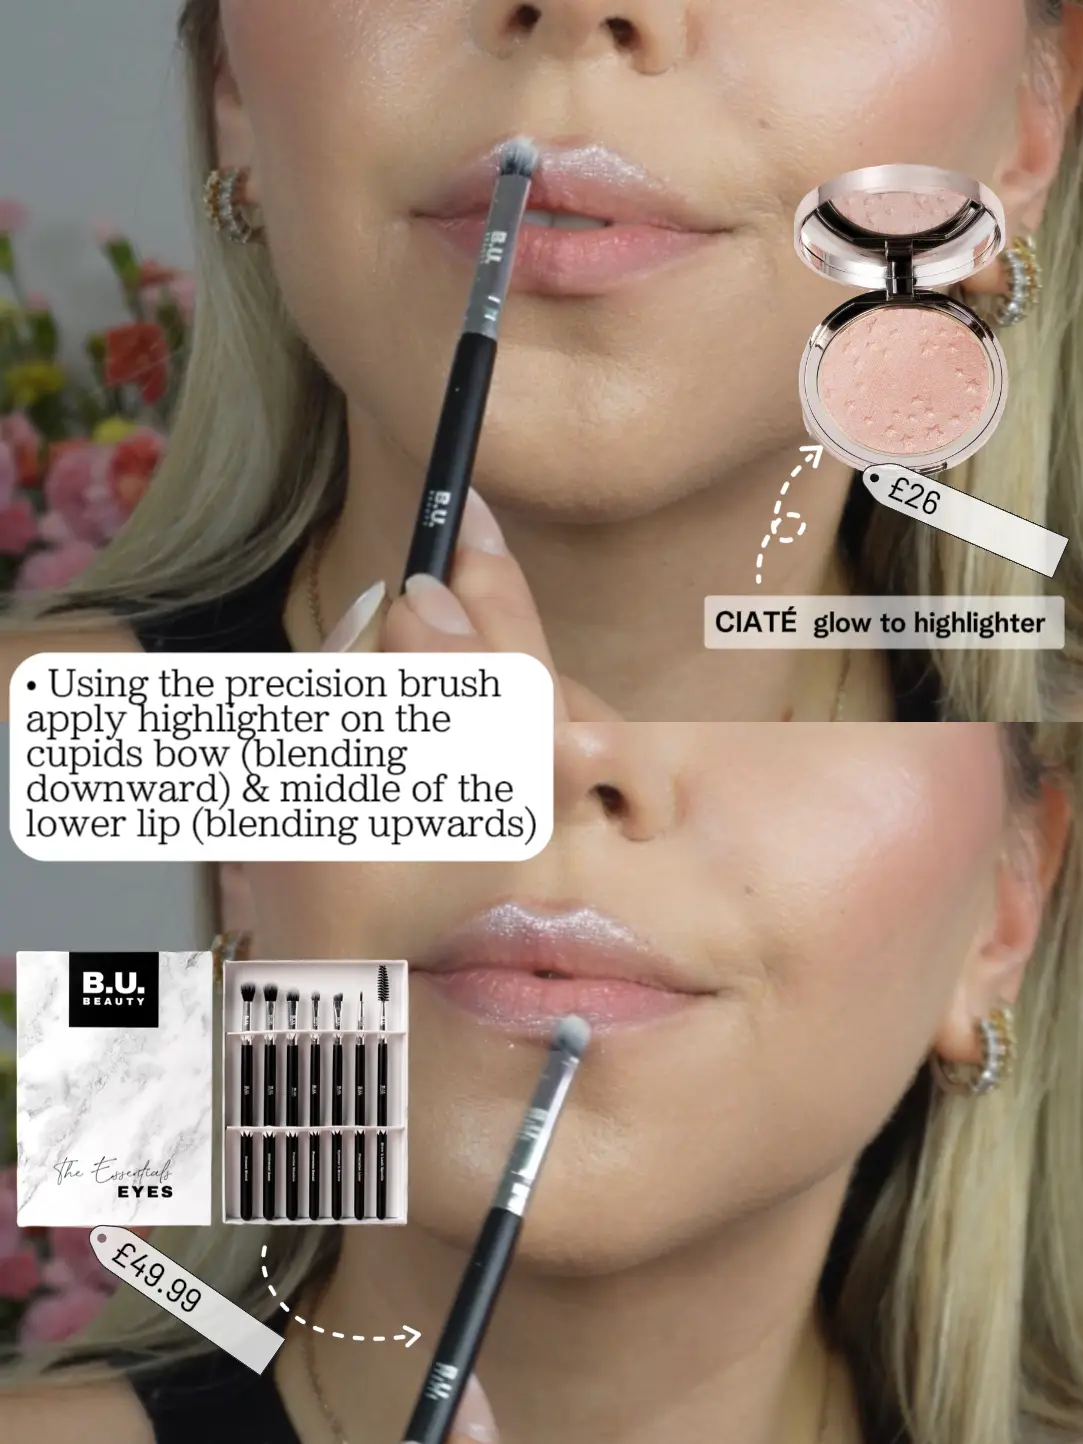 How To Use Foundation To Minimize The Shape Of Your Cupid's Bow